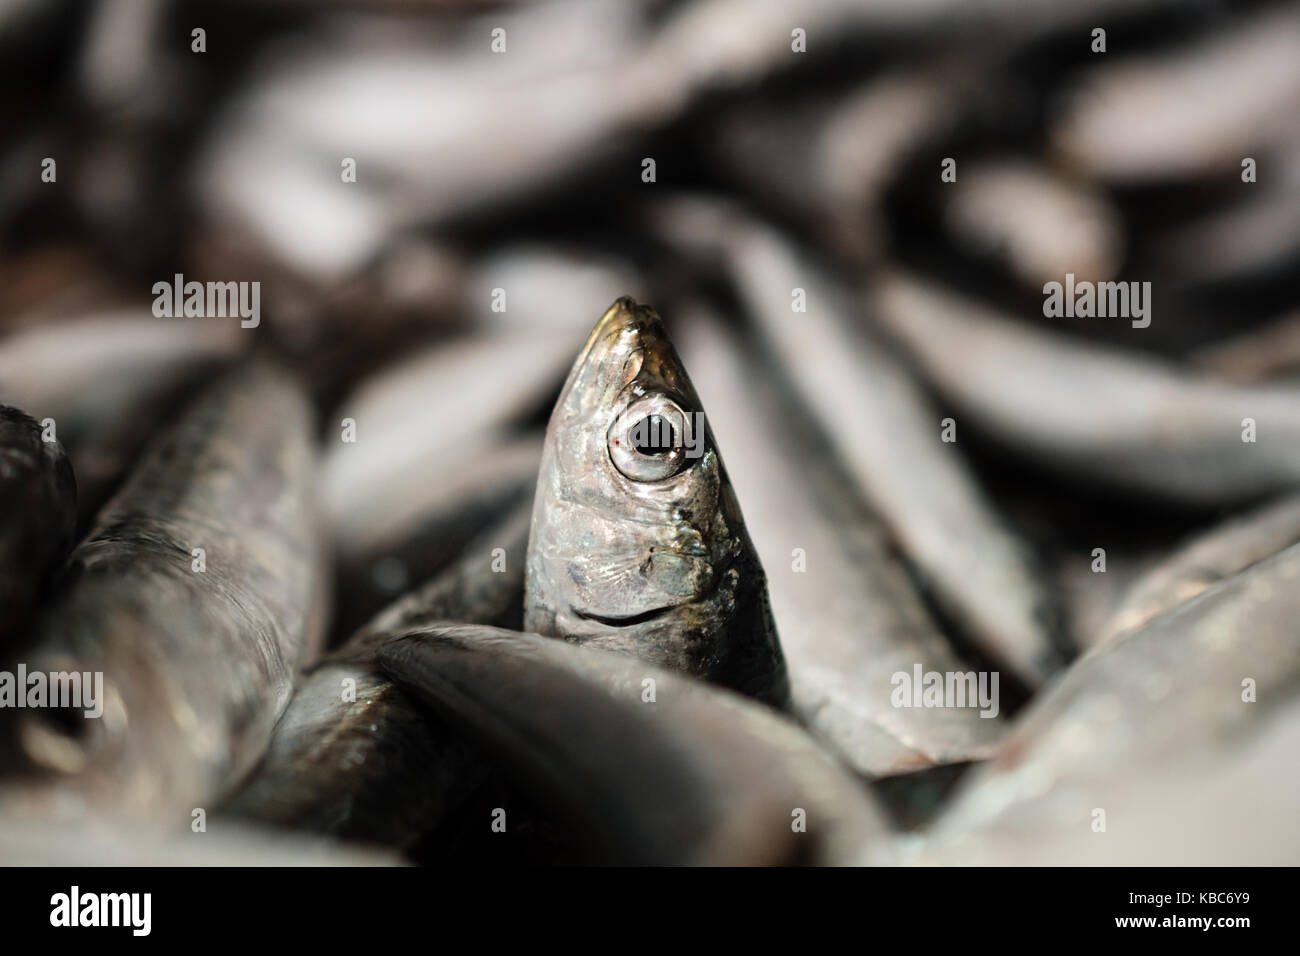 Close-Up Of One European Sardine Or Sardina Pilchardus In A Larger Pile Of Freshly Caught Sardines Lined Up For Sale In Greek Fish Market Stock Photo